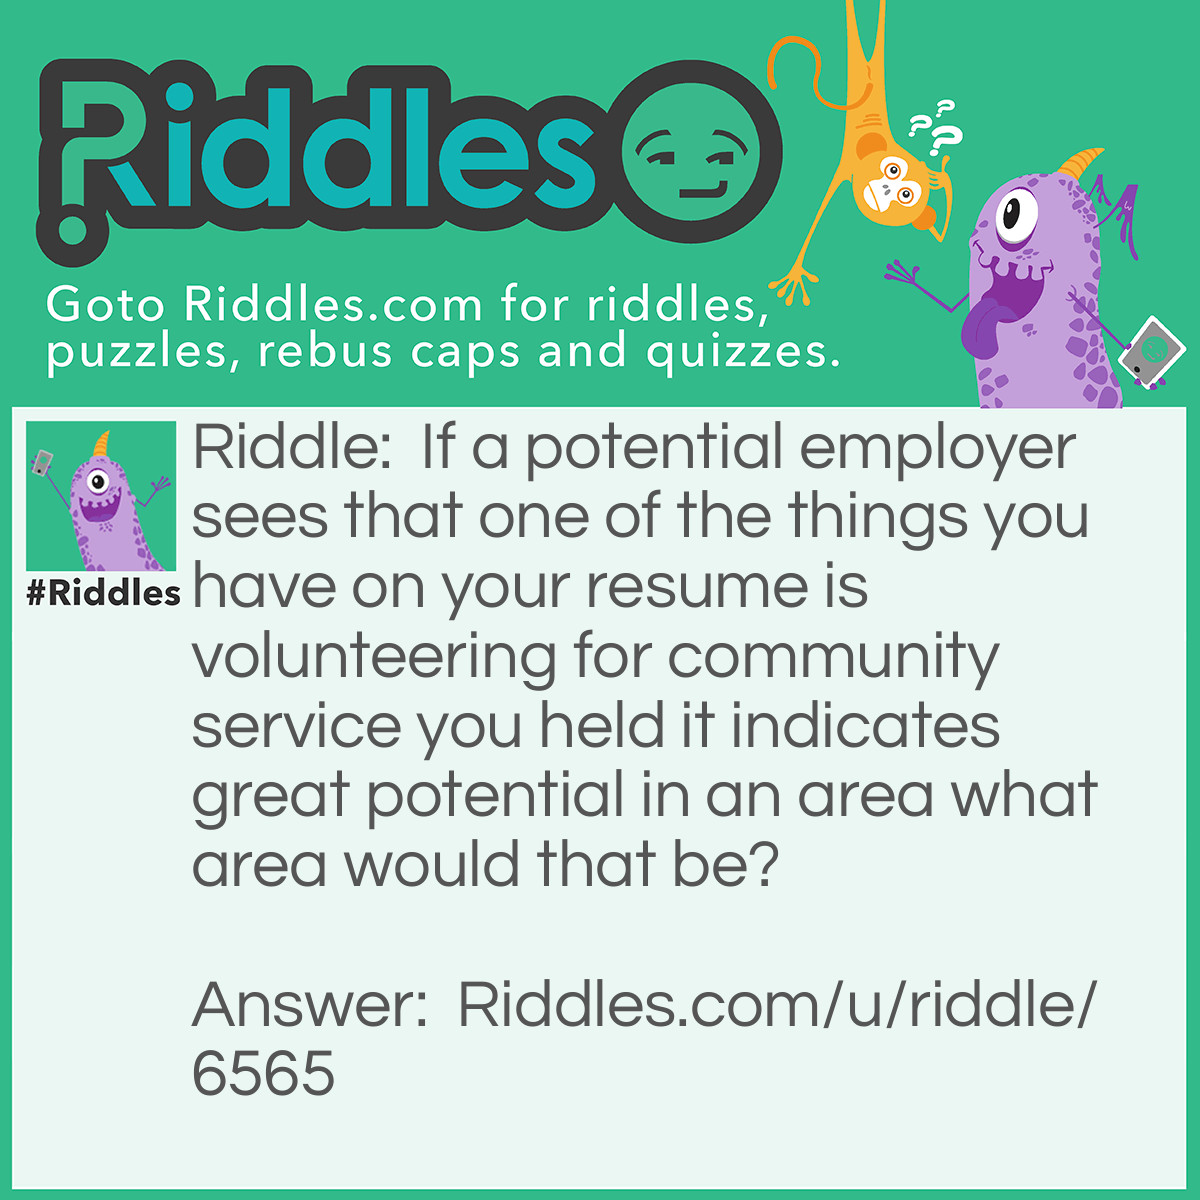 Riddle: If a potential employer sees that one of the things you have on your resume is volunteering for community service you held it indicates great potential in an area what area would that be? Answer: great leadership potential